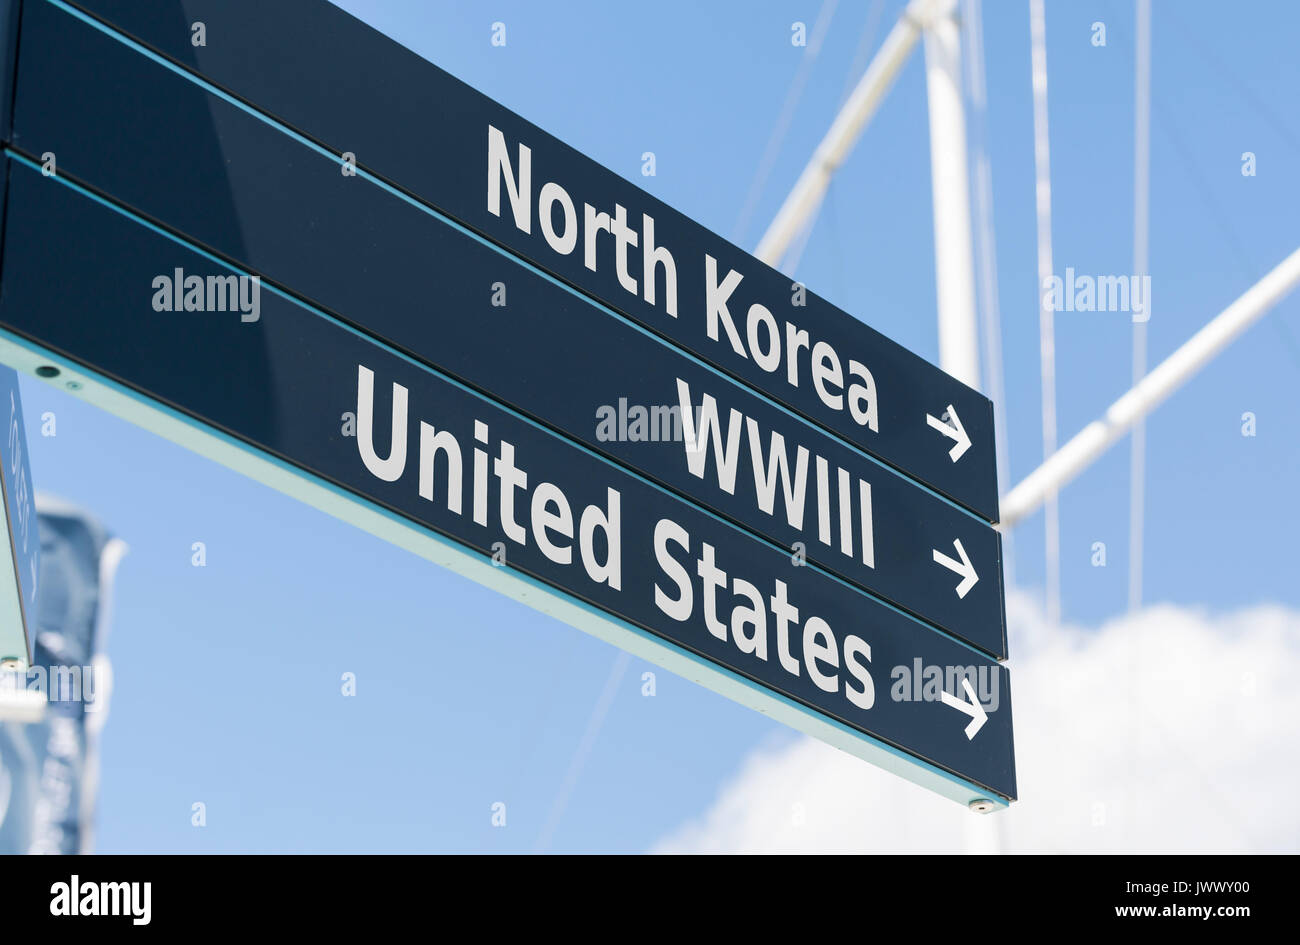 Sign pointing to North Korea, United States of America (USA) and WWIII (World War 3, WW3). Stock Photo